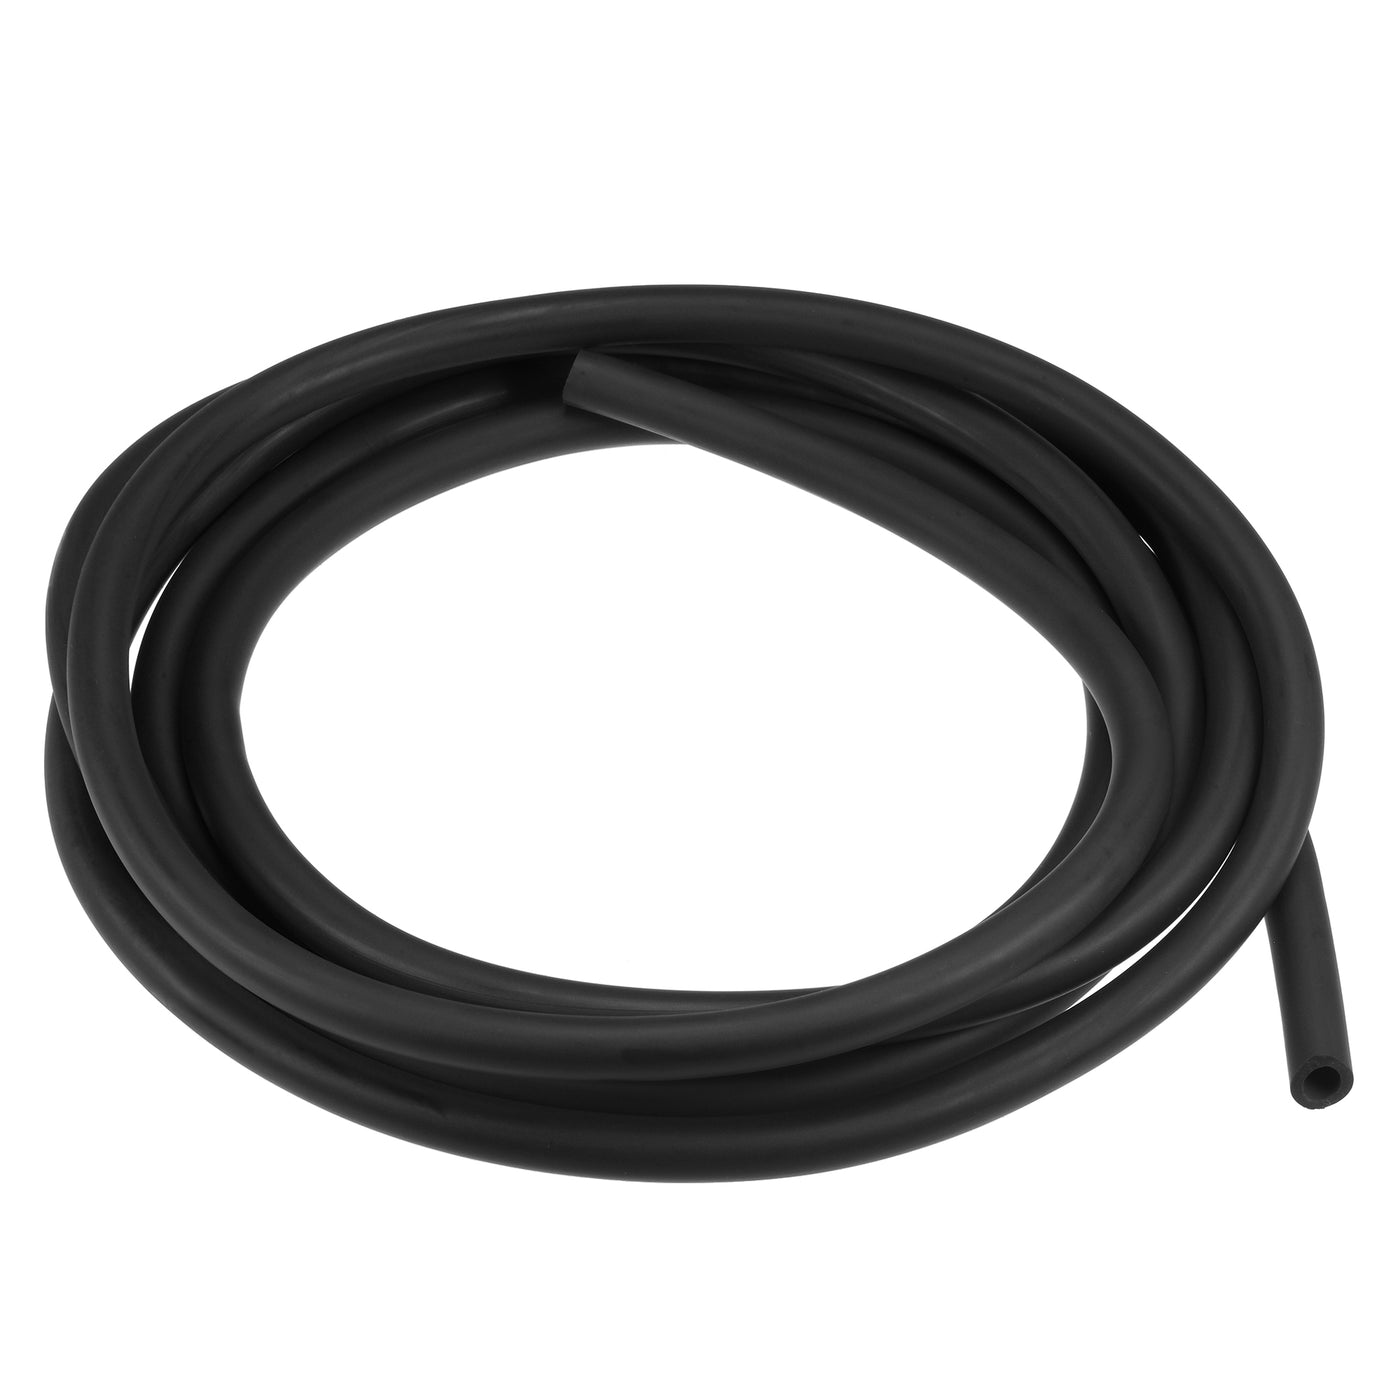 uxcell Uxcell Latex Tubing 1/4-inch ID 3/8-inch OD 10ft Elastic Rubber Hose Black